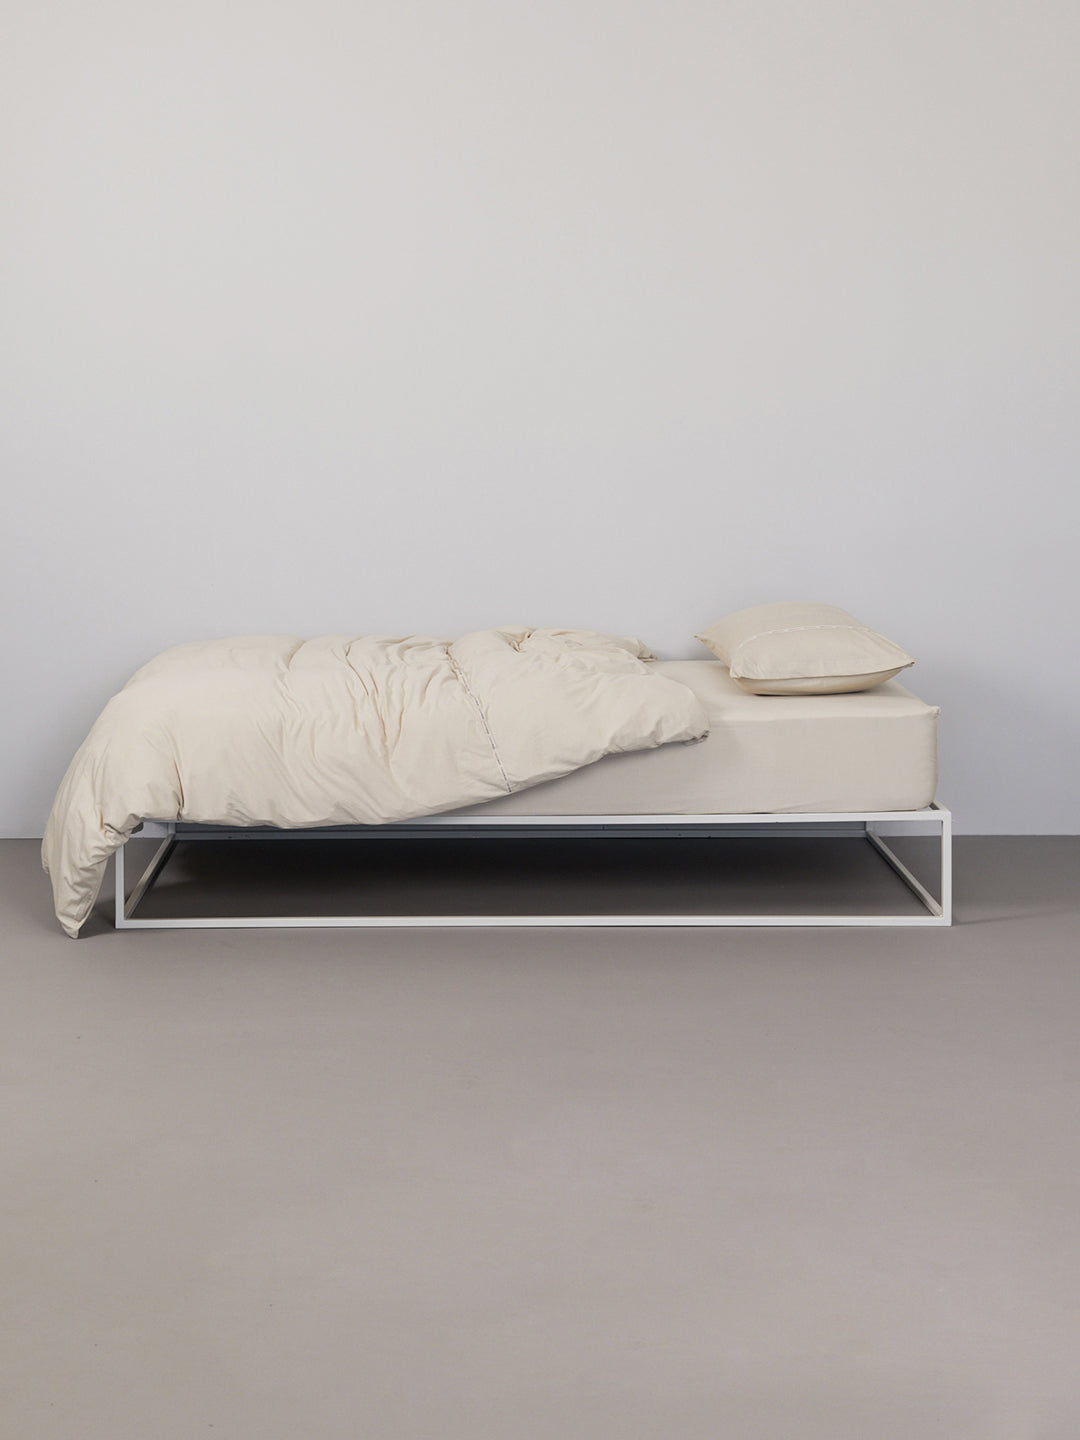 Hey you are on Fitted Bed Sheet | Basic product page. Image: Fitted Sheet on a white metal frame bed in a grey room